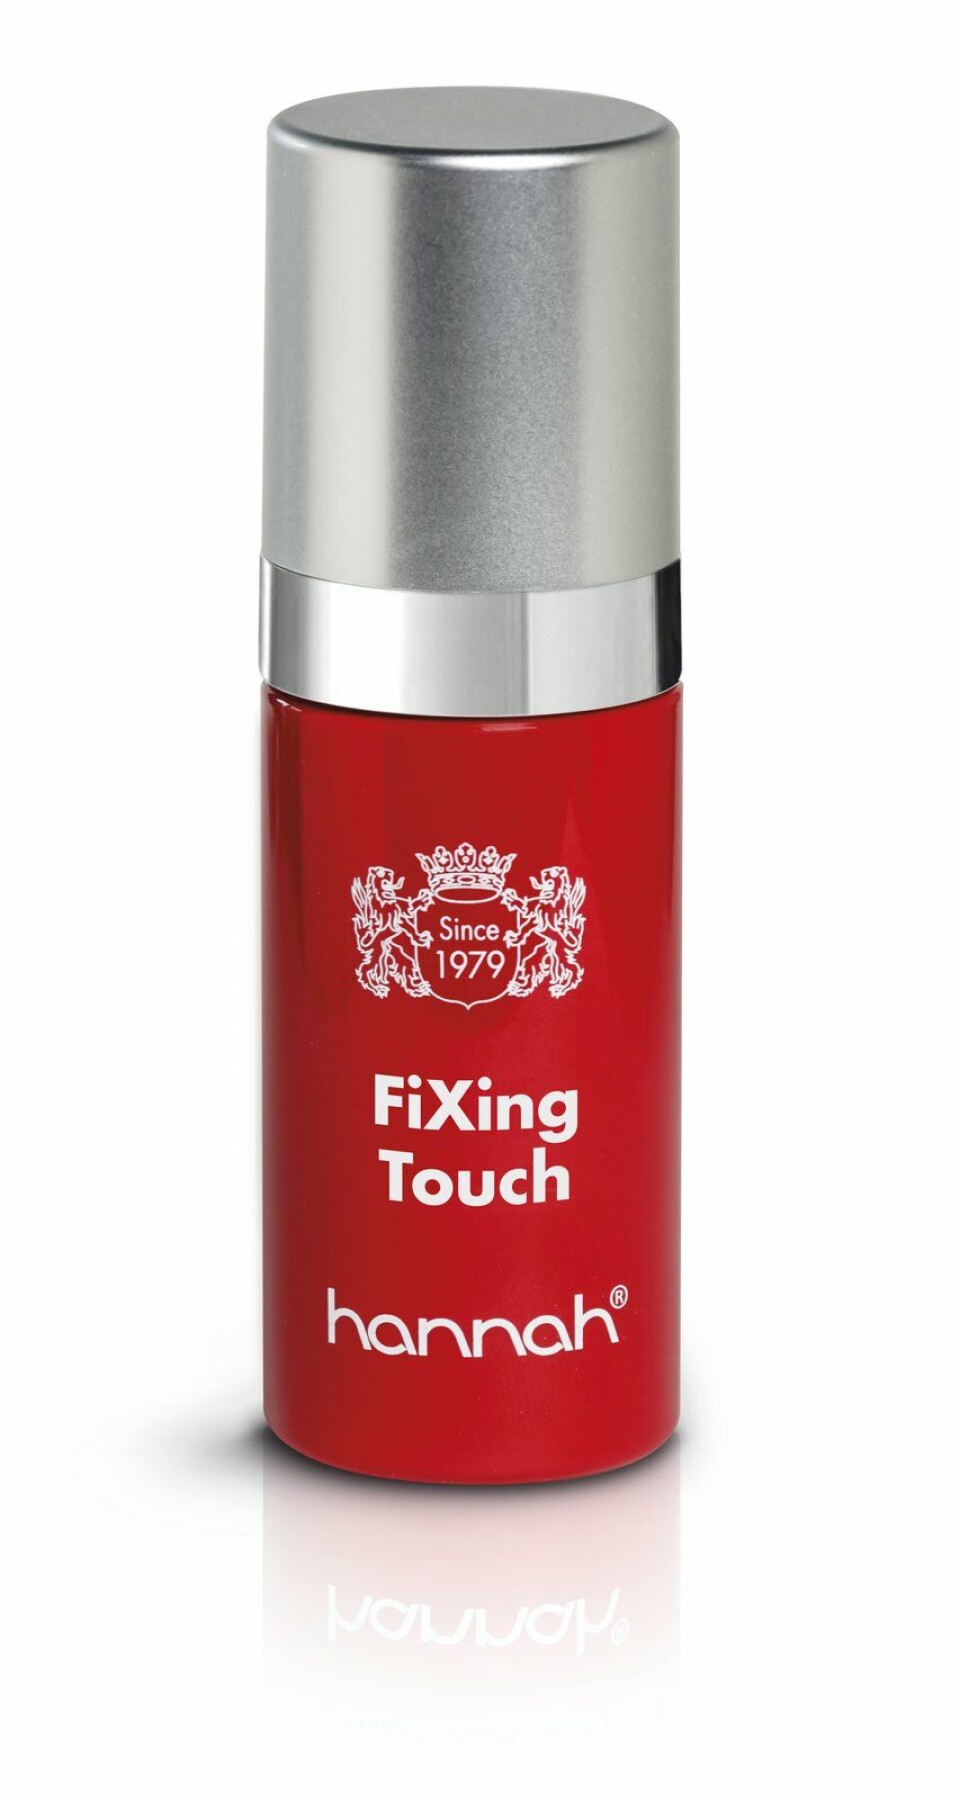 hannah FiXing Touch